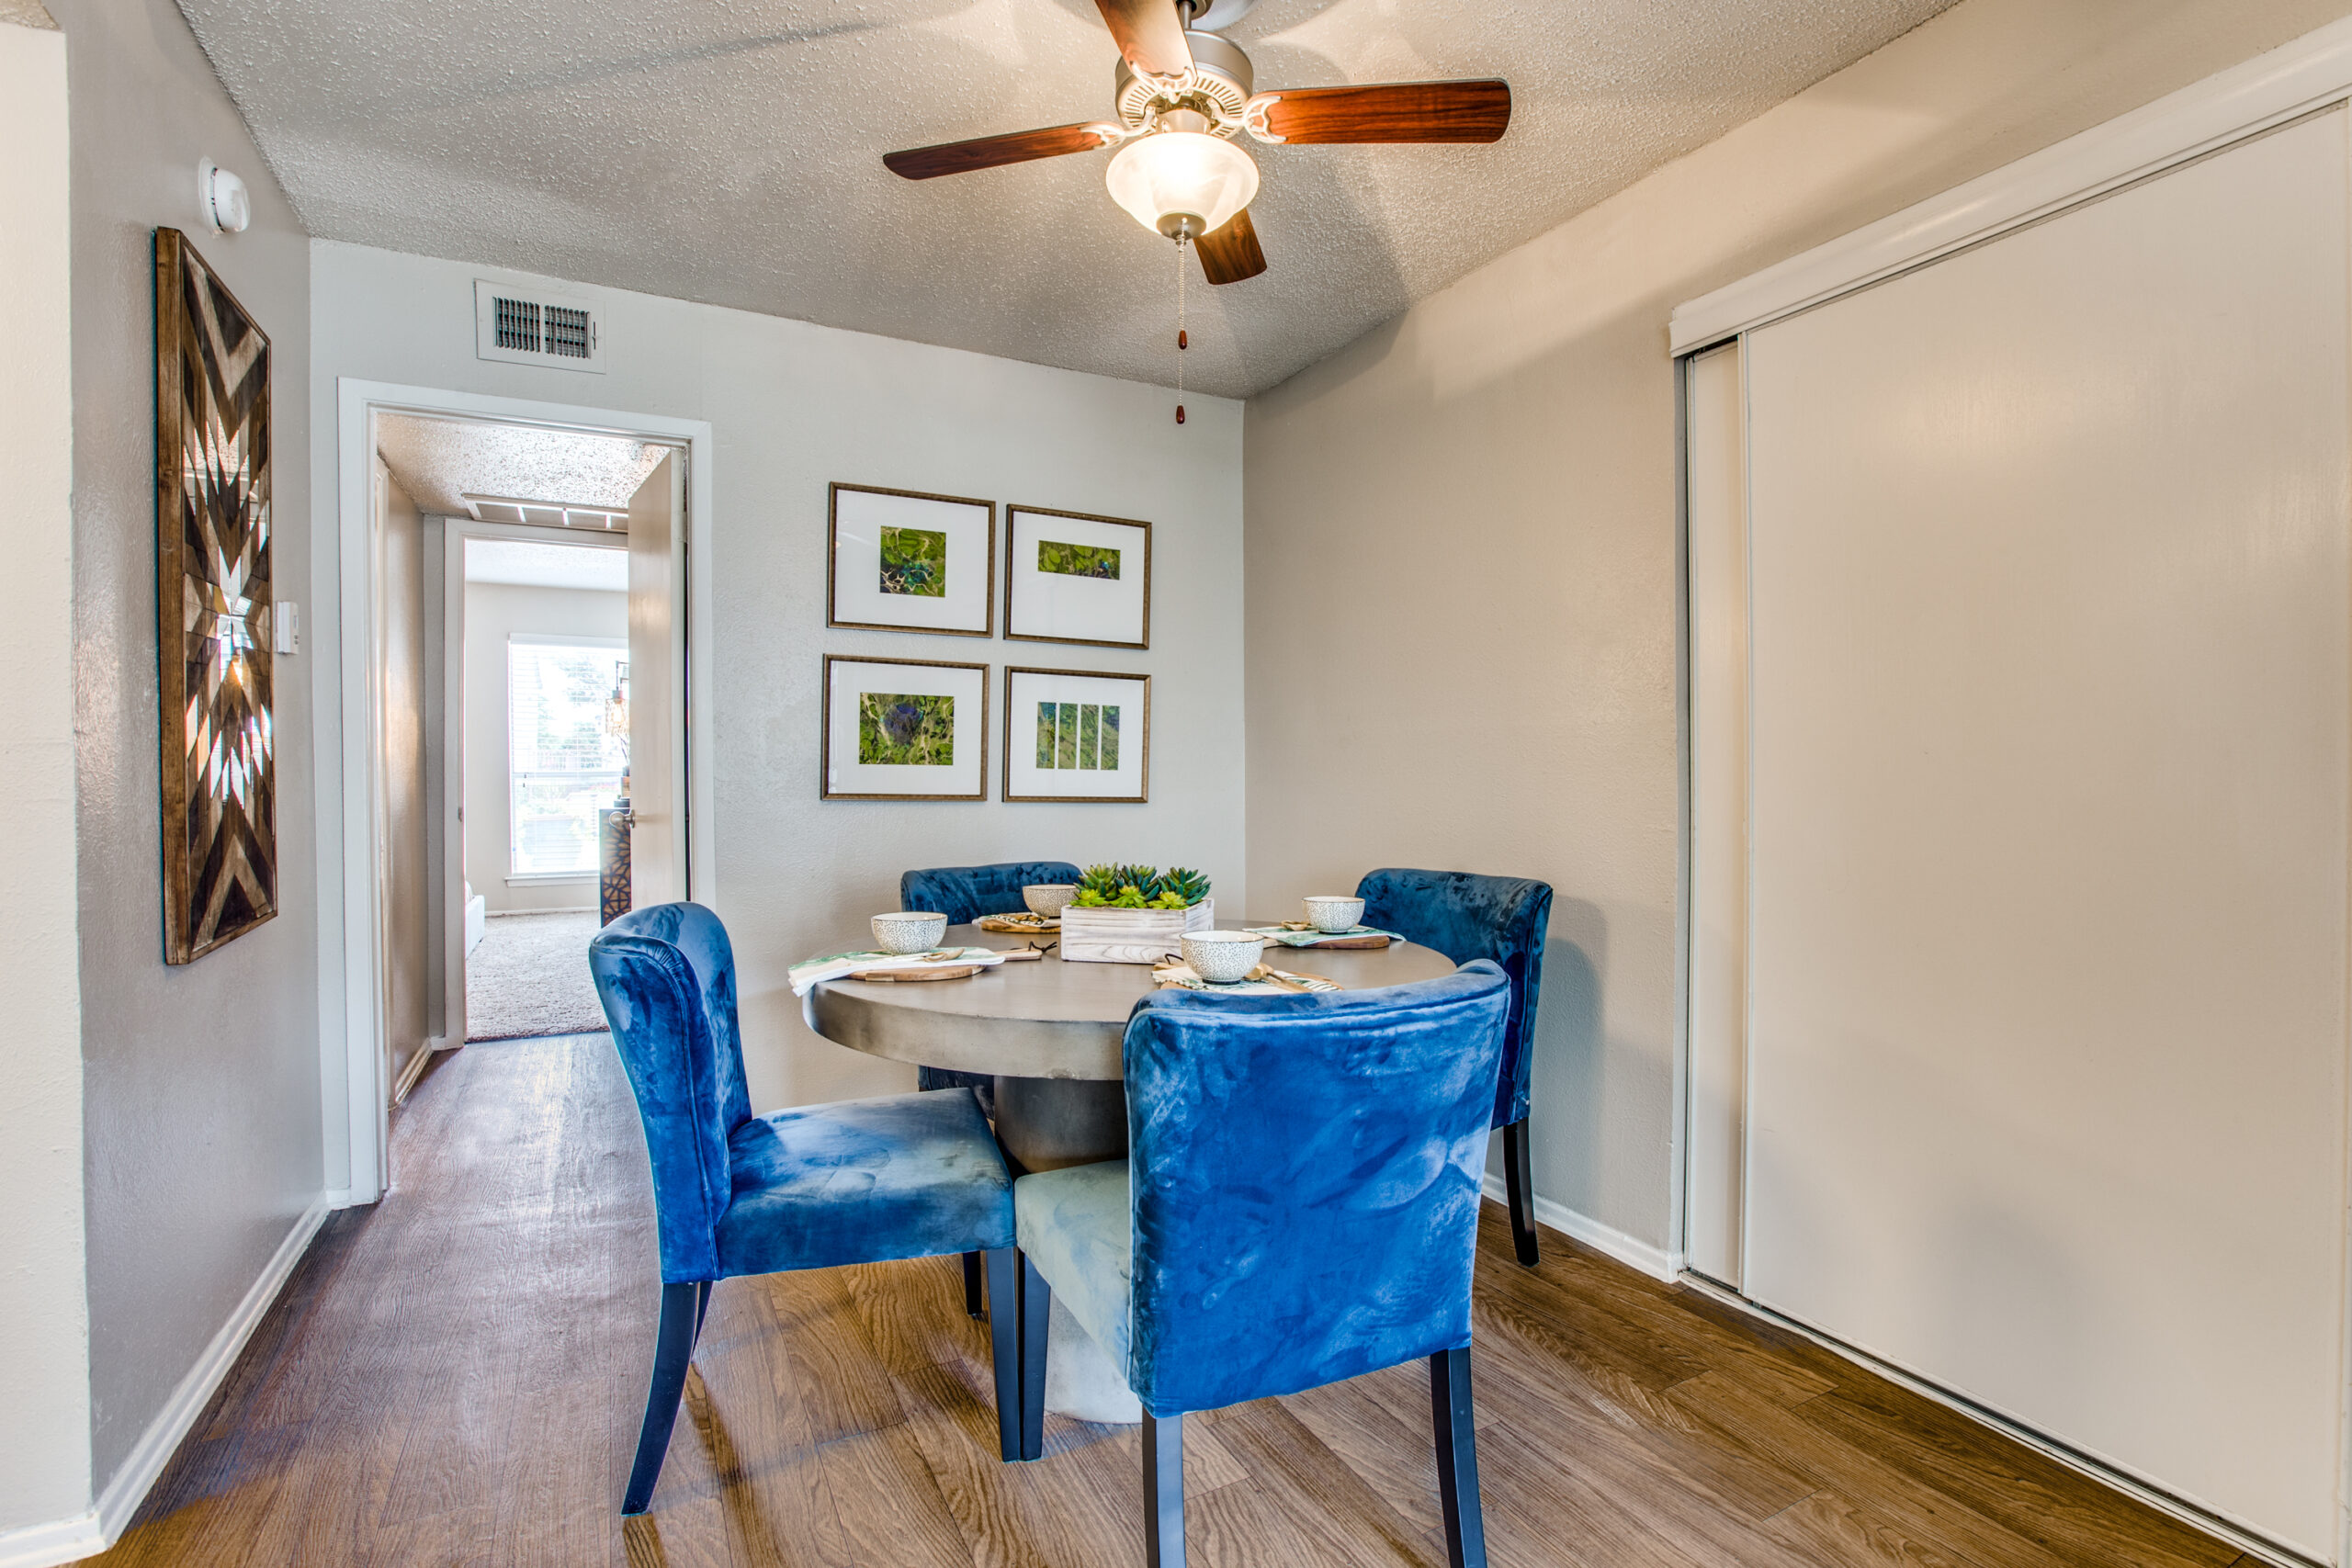 model dining room with blue chairs and ceiling fan